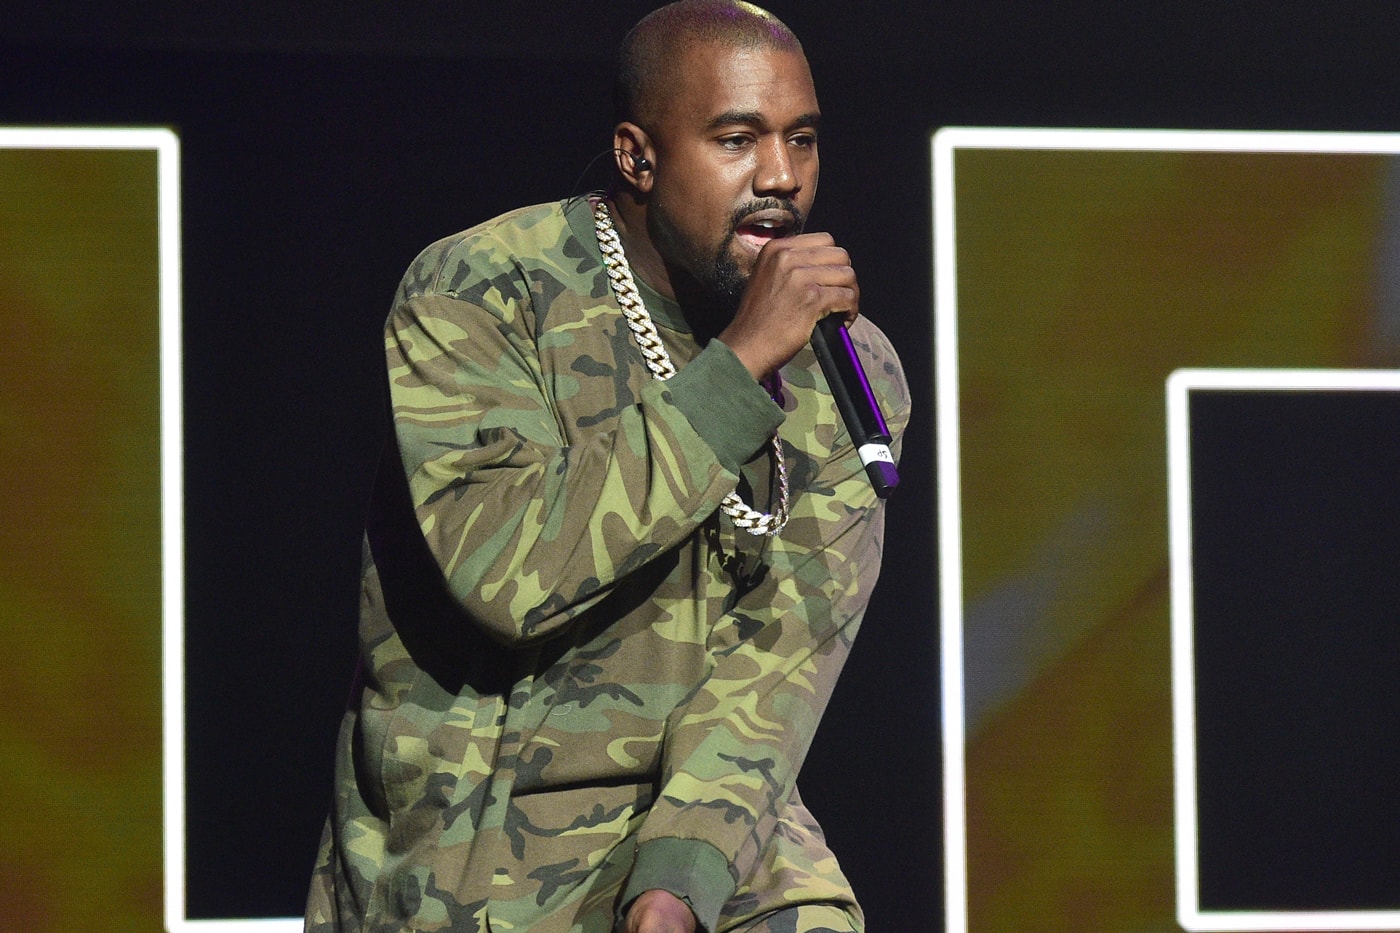 kanye-west-performing-at-2016-watermill-center-summer-benefit-gala